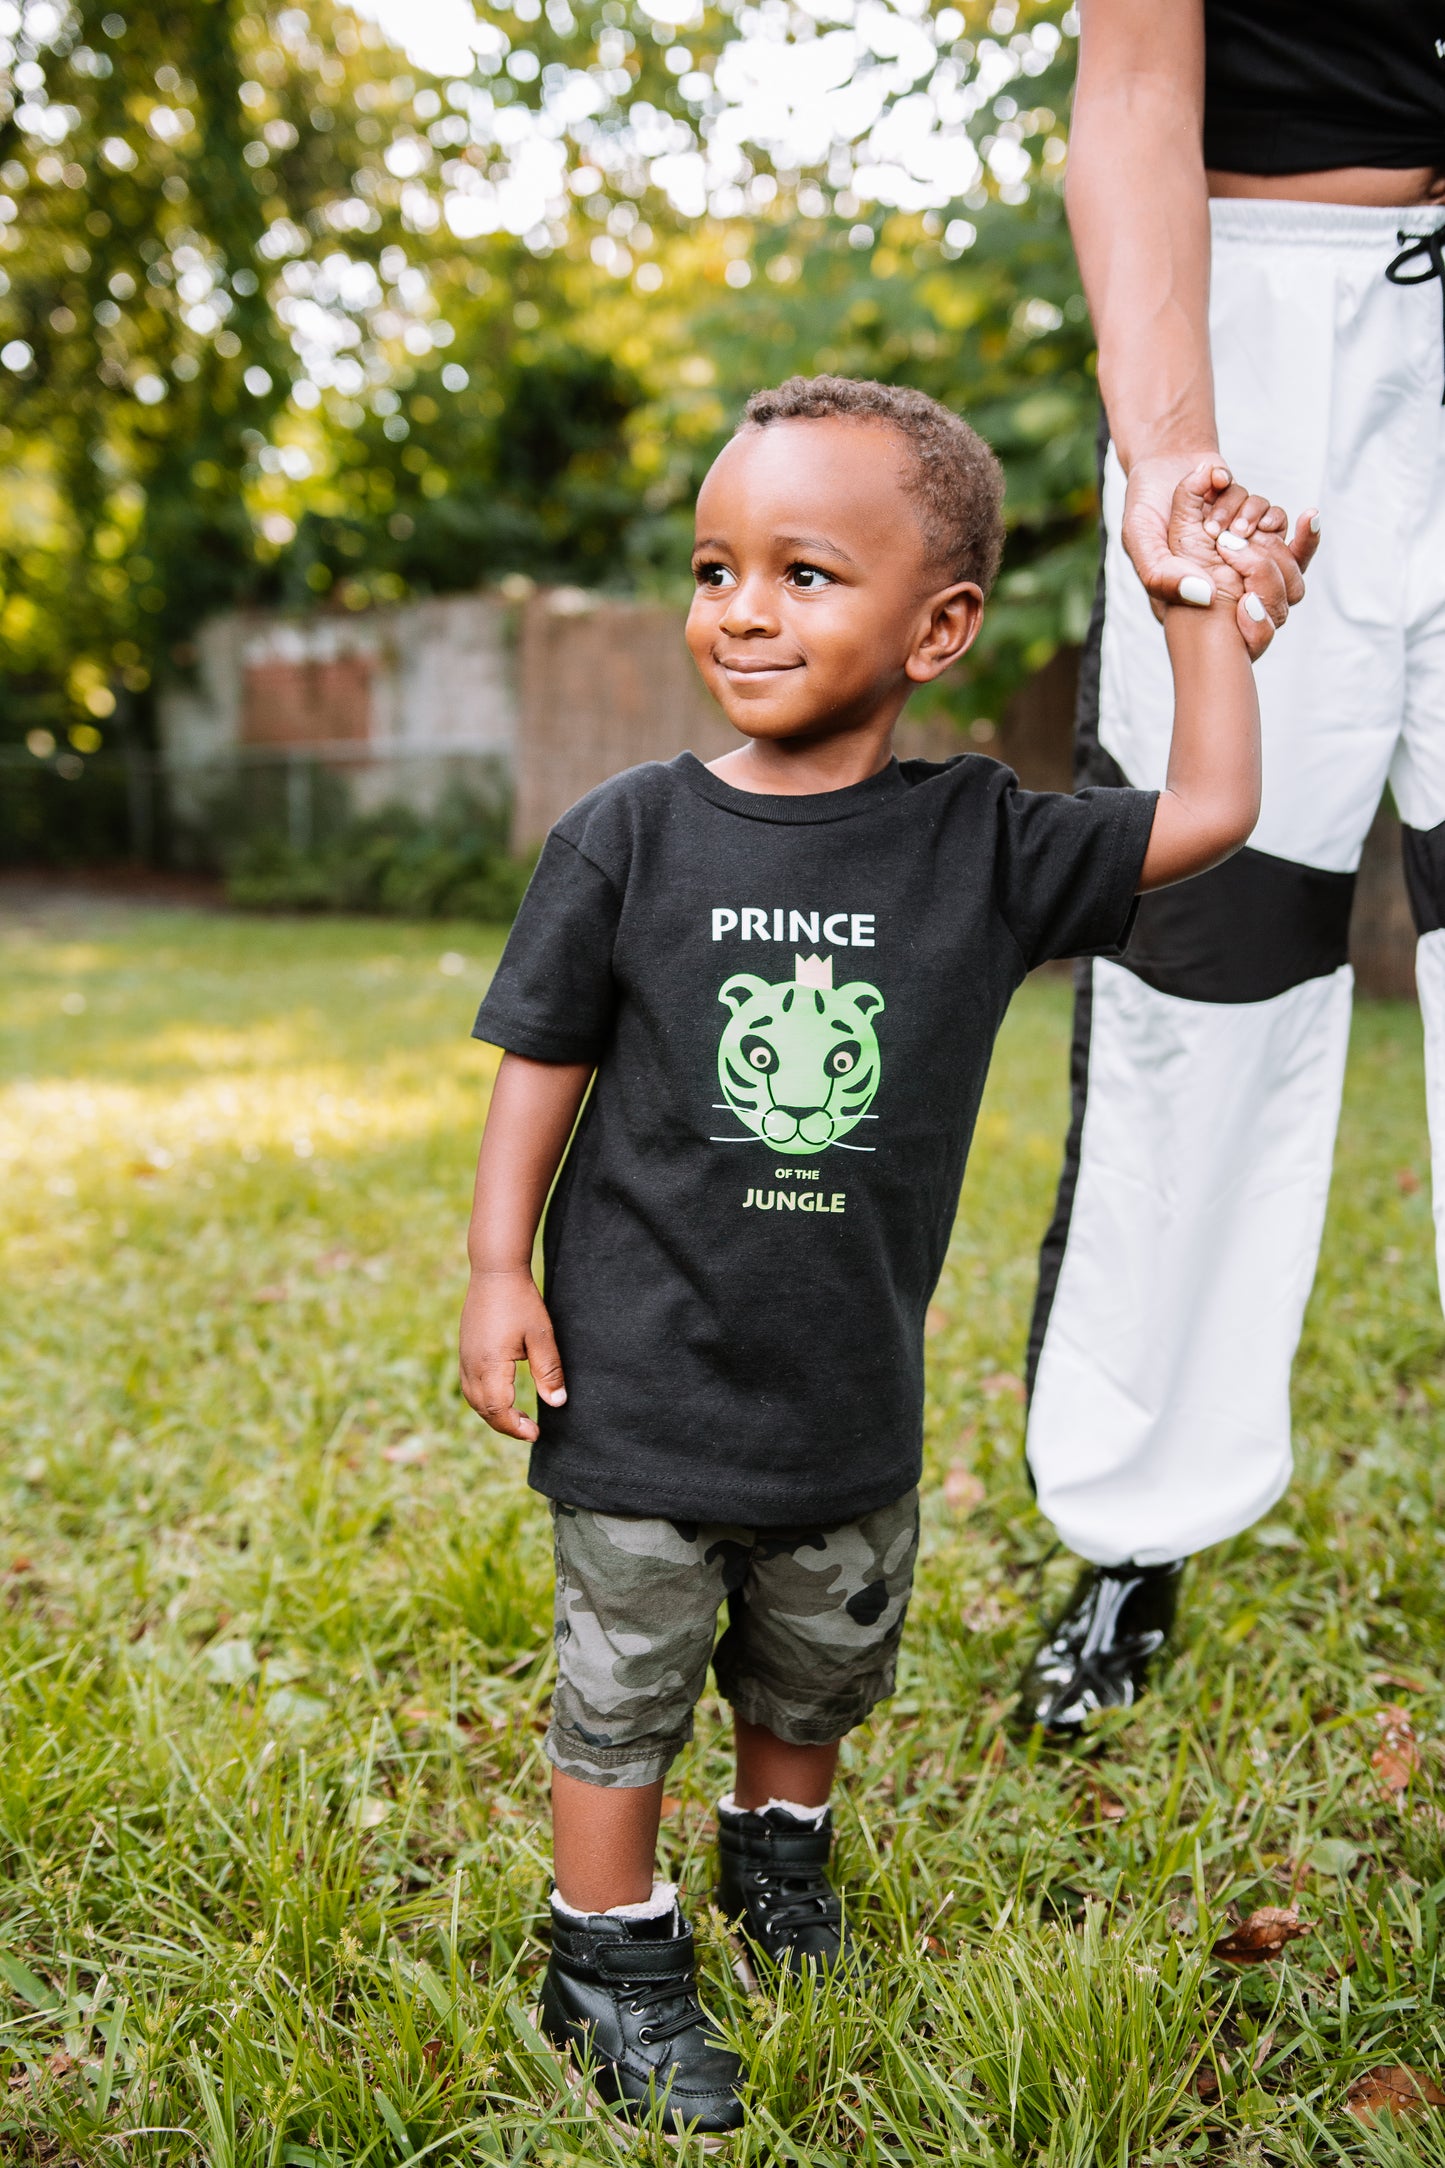 Prince of the jungle - premium crewneck black shirt for boys with a green glow in the dark tiger design